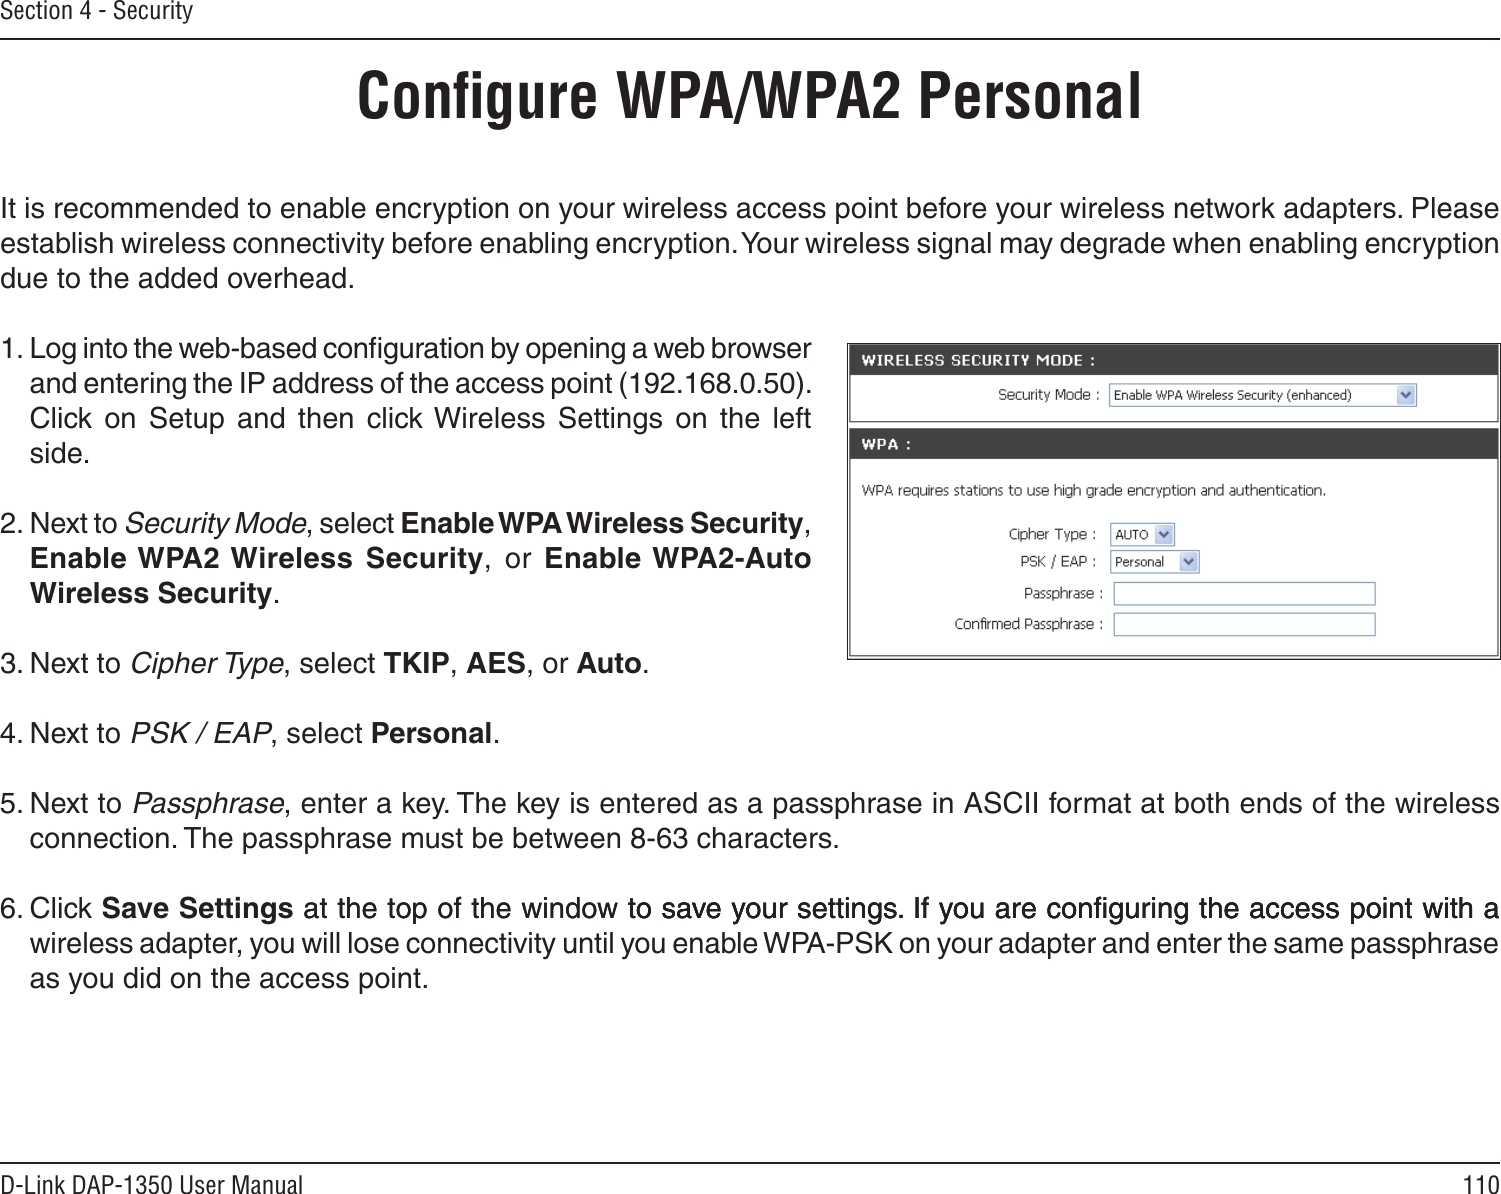 110D-Link DAP-1350 User ManualSection 4 - SecurityConﬁgure WPA/WPA2 PersonalIt is recommended to enable encryption on your wireless access point before your wireless network adapters. Please establish wireless connectivity before enabling encryption. Your wireless signal may degrade when enabling encryption due to the added overhead.1. Log into the web-based conﬁguration by opening a web browser and entering the IP address of the access point (192.168.0.50).  Click  on  Setup  and  then  click Wireless  Settings  on  the  left side.2. Next to Security Mode, select Enable WPA Wireless Security, Enable WPA2 Wireless  Security,  or  Enable WPA2-Auto Wireless Security.3. Next to Cipher Type, select TKIP, AES, or Auto.4. Next to PSK / EAP, select Personal.5. Next to Passphrase, enter a key. The key is entered as a passphrase in ASCII format at both ends of the wireless connection. The passphrase must be between 8-63 characters. 6. Click Save Settings at the top of the window to save your settings. If you are conﬁguring the access point with aat the top of the window to save your settings. If you are conﬁguring the access point with ato save your settings. If you are conﬁguring the access point with a wireless adapter, you will lose connectivity until you enable WPA-PSK on your adapter and enter the same passphrase as you did on the access point.